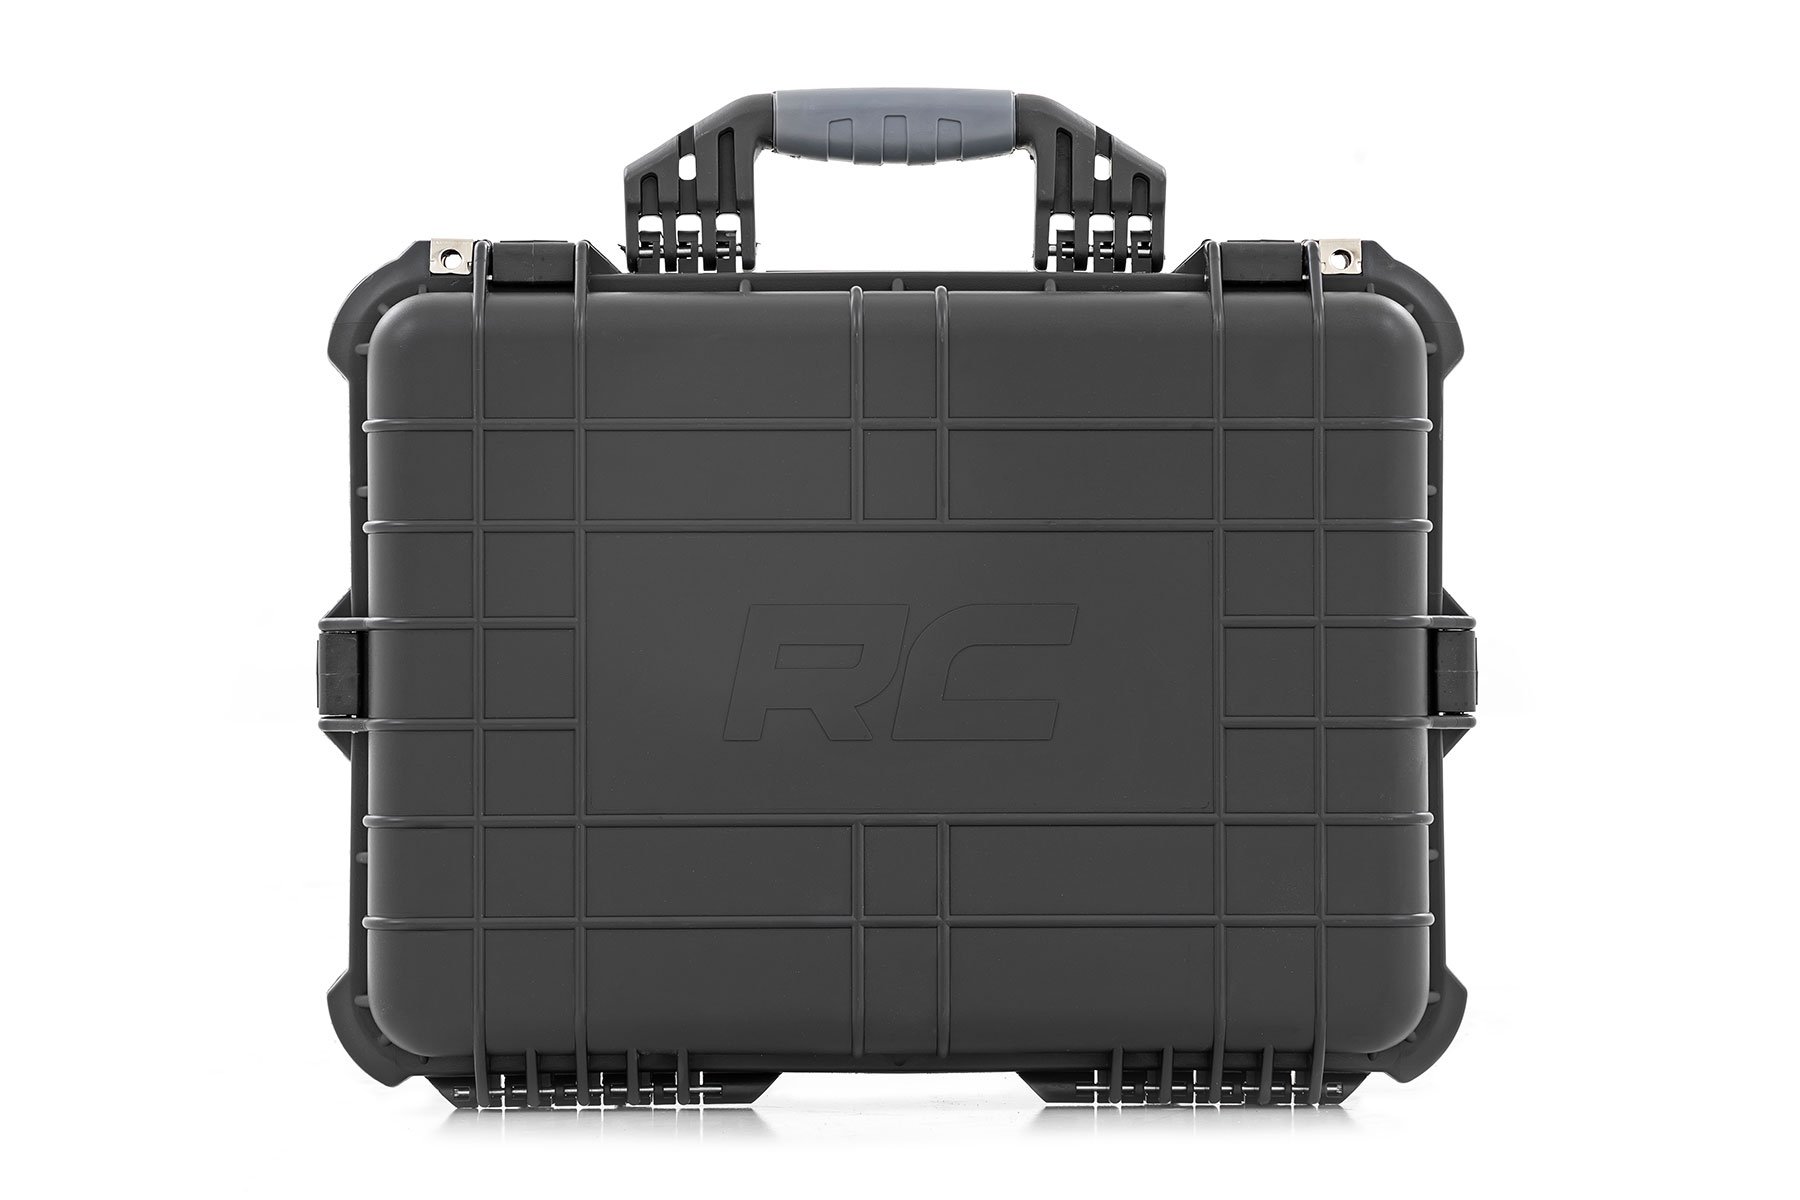 Outdoor Shockproof Impact Resistant Box for Keeping Tools